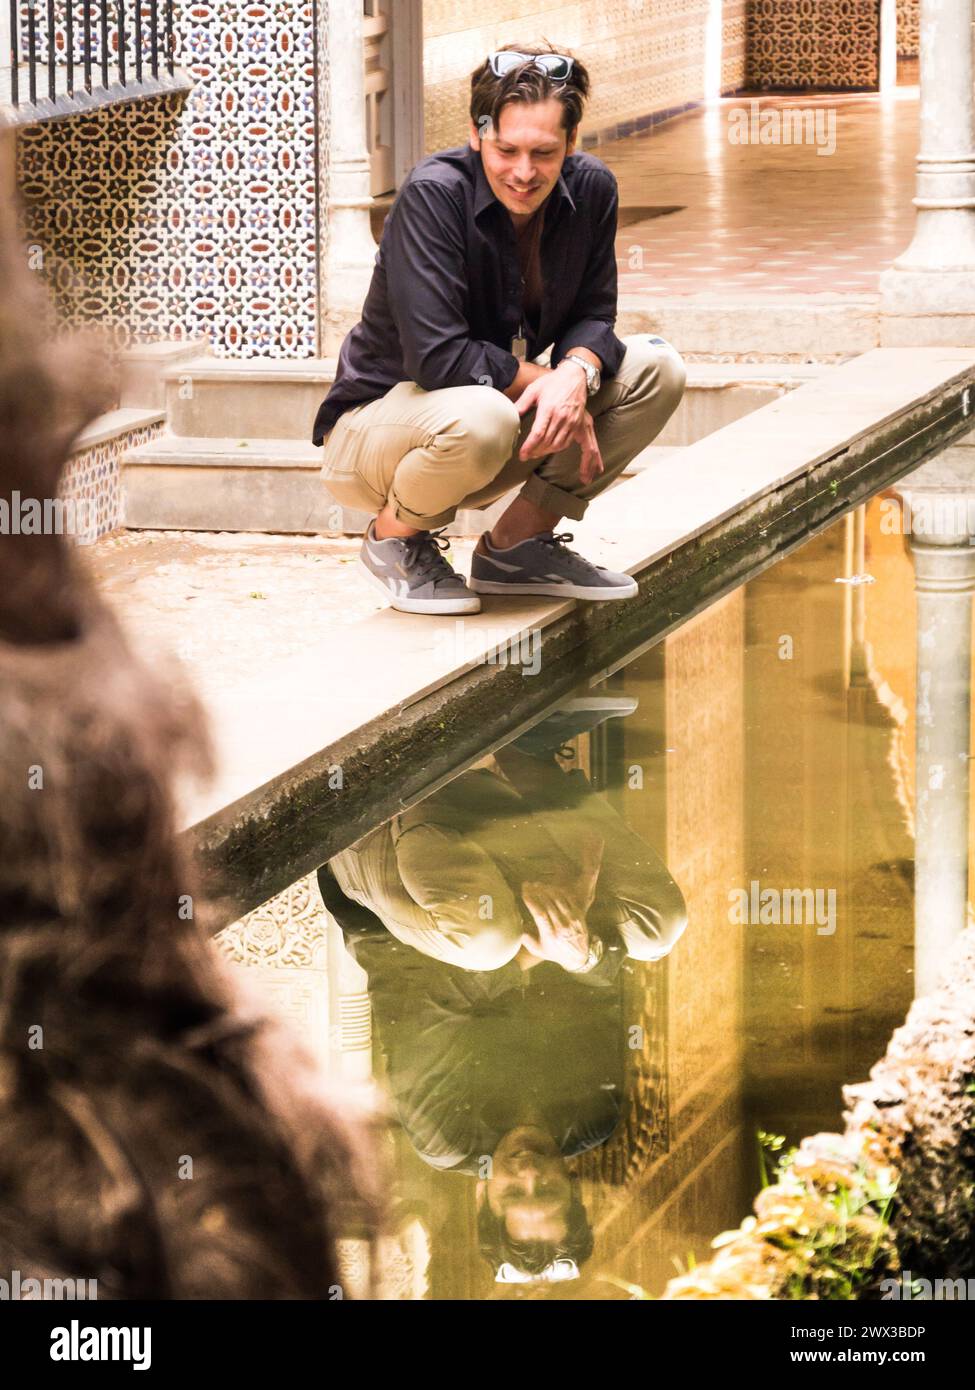 Thirty-year-old man looks smiling at himself in the reflection of a fountain while crouching Stock Photo